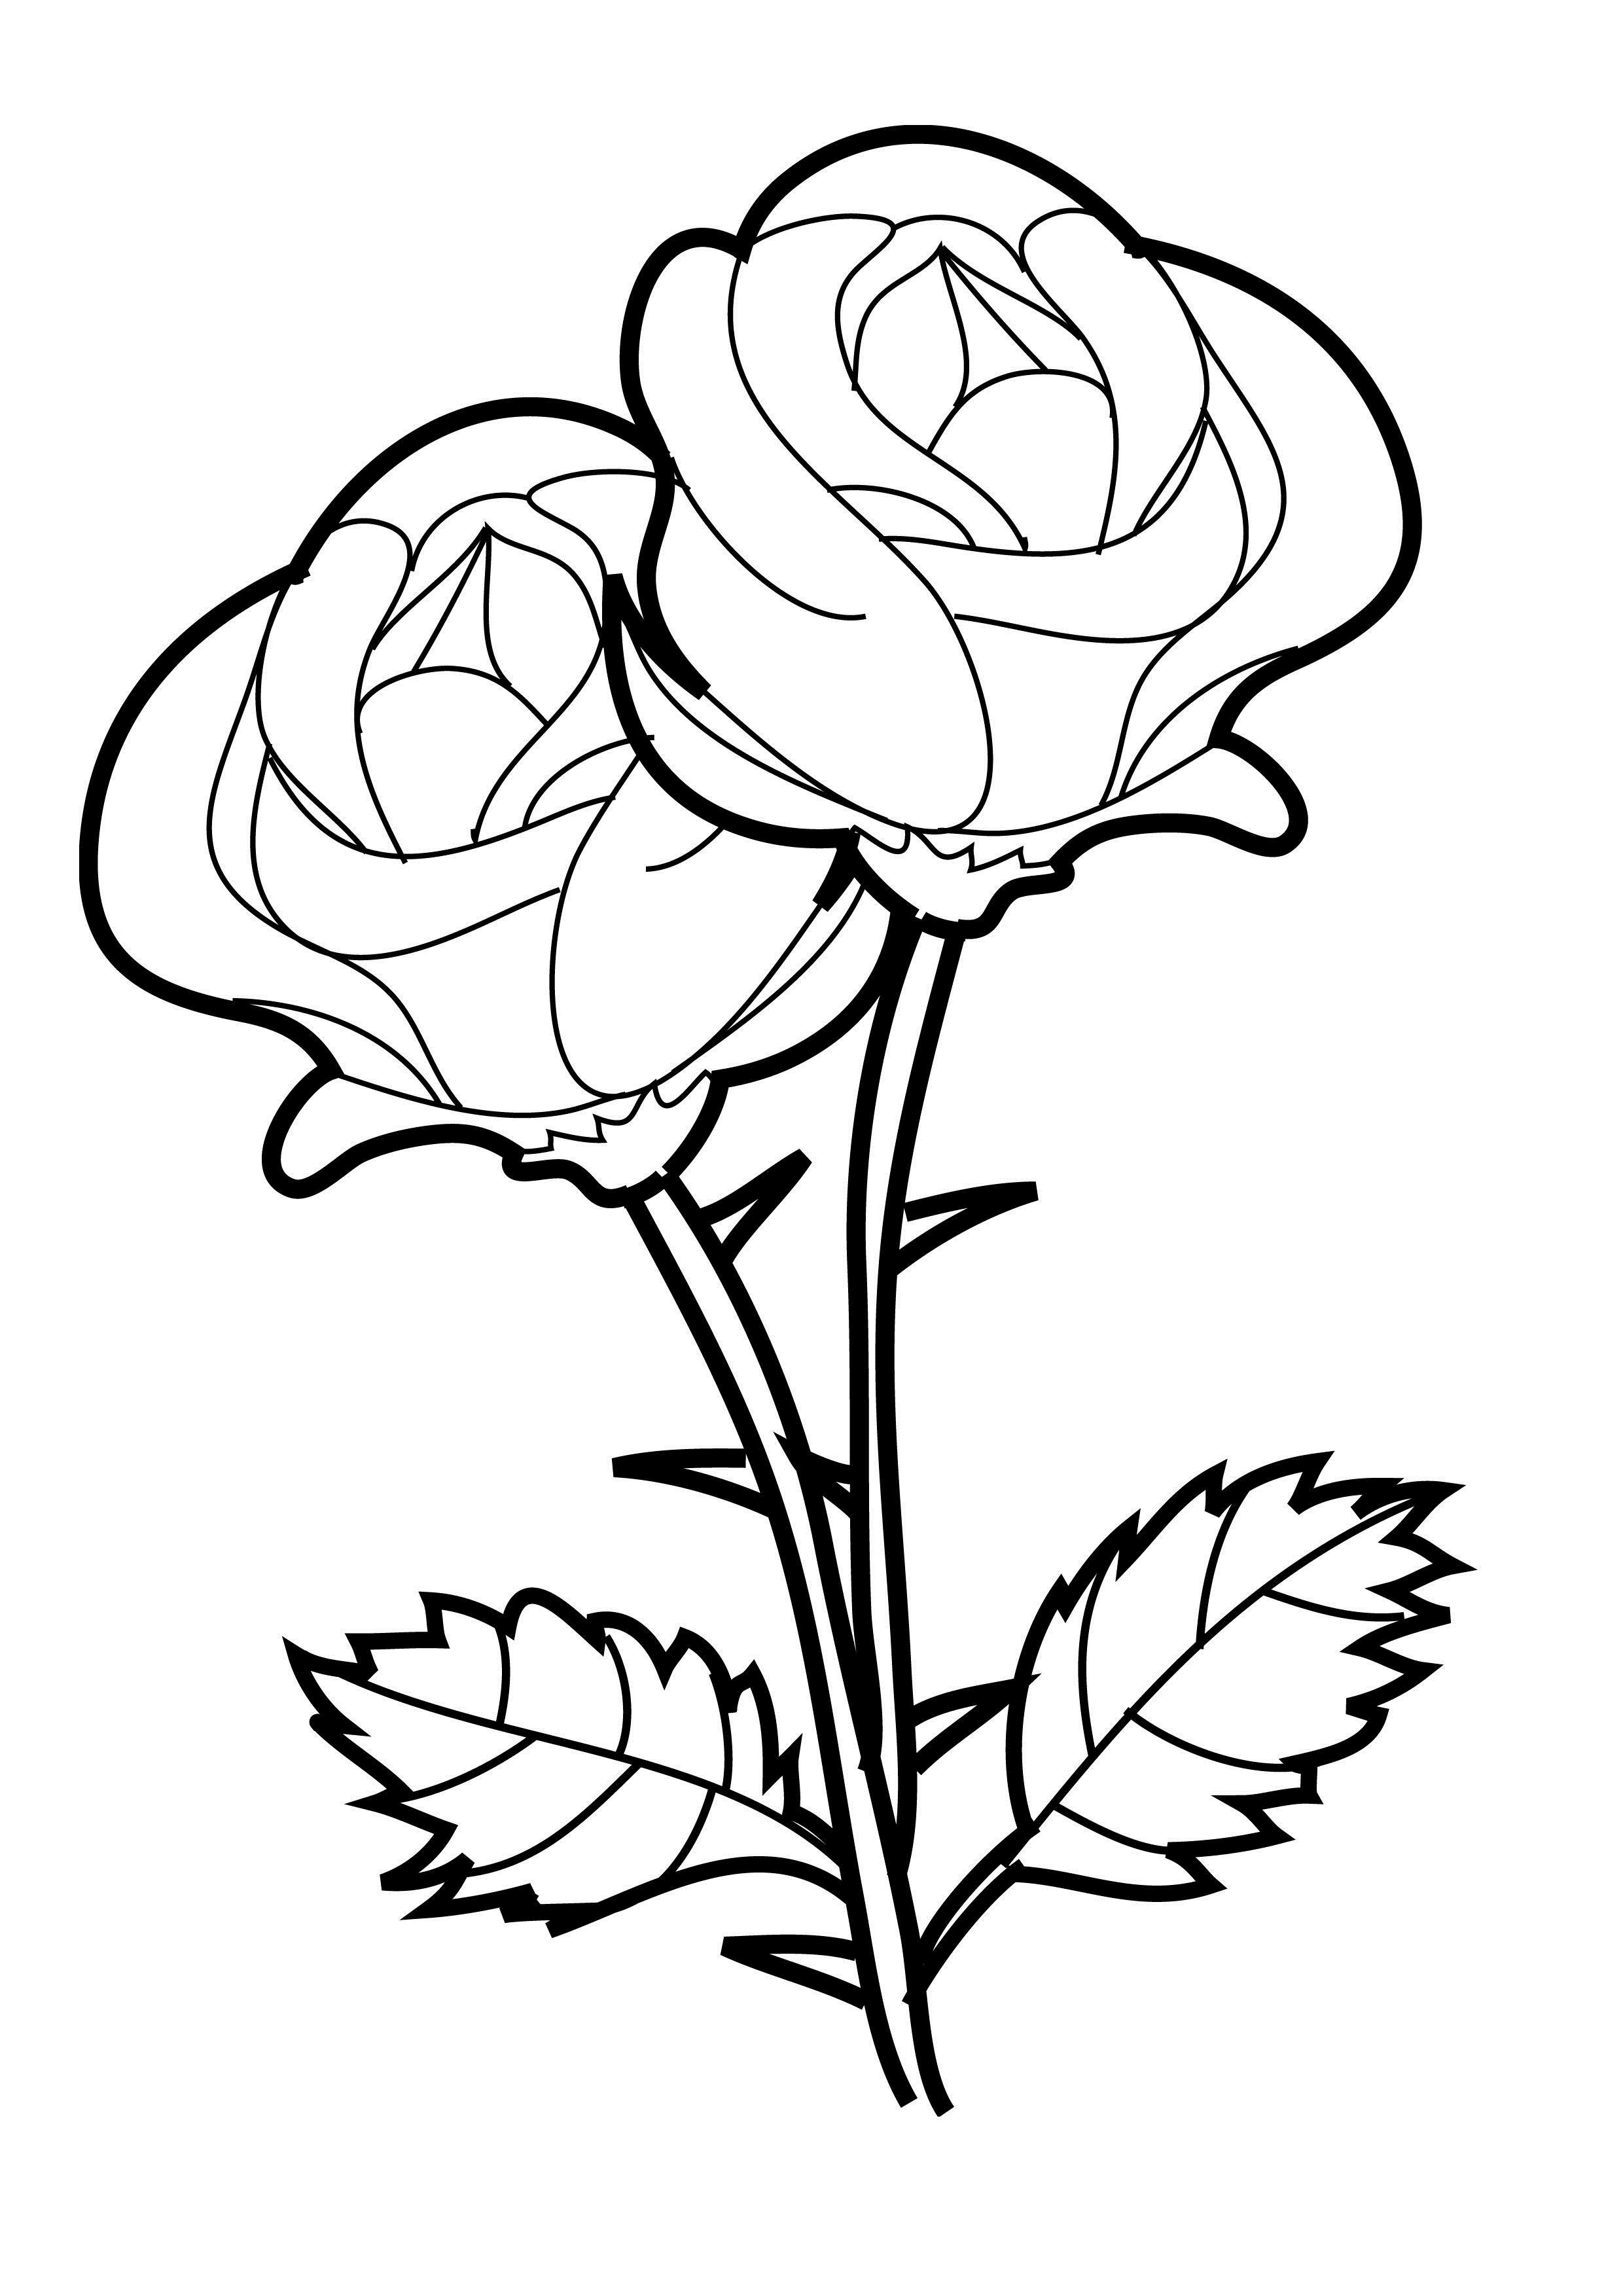 204 Cute Vine Coloring Pages for Kindergarten